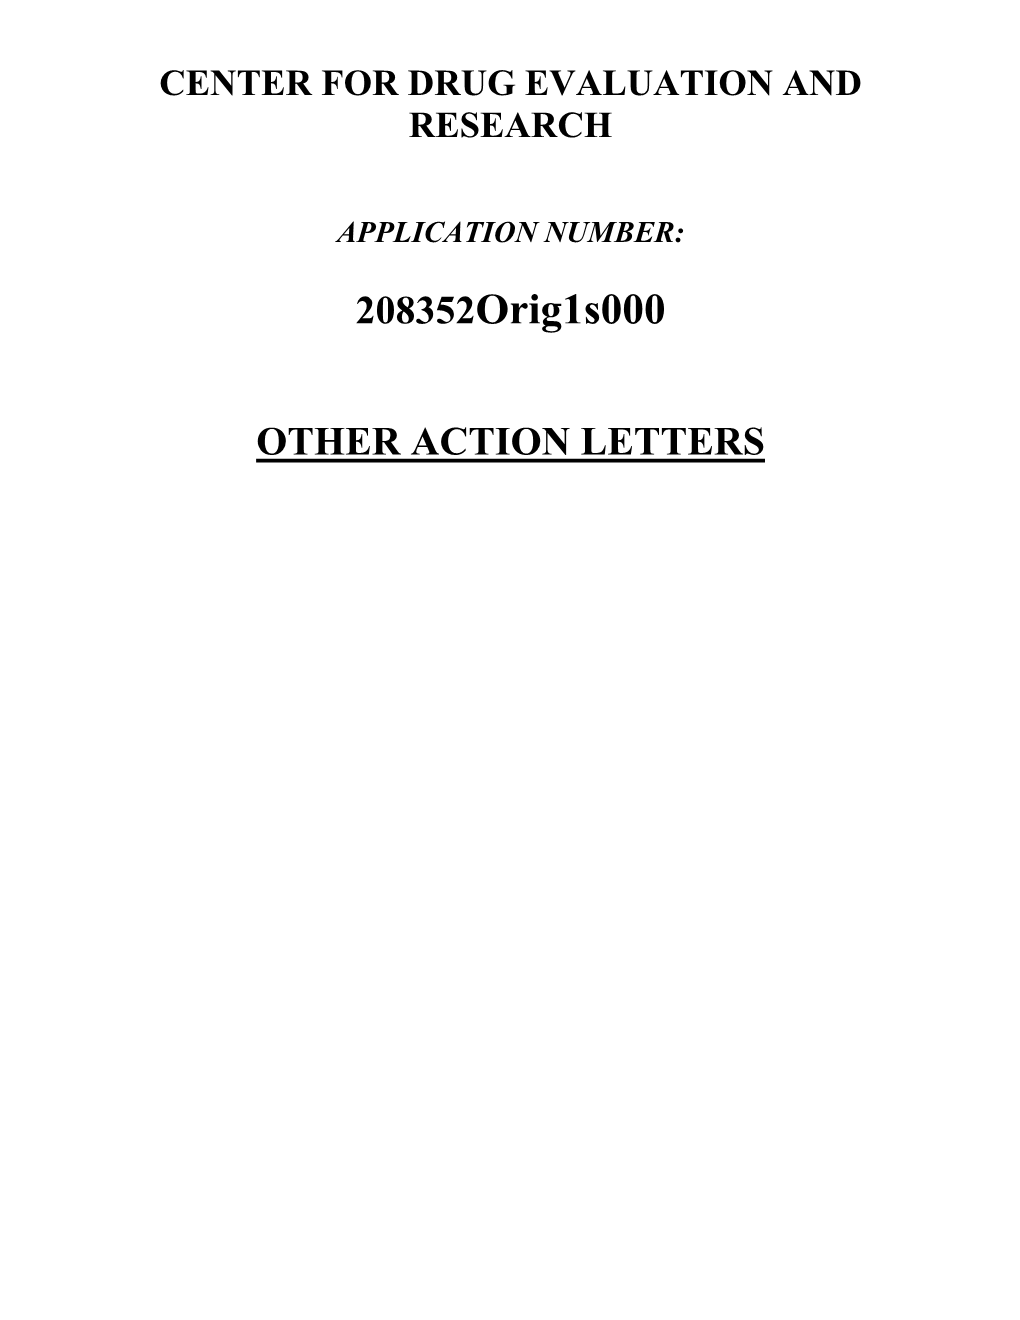 Other Action Letters